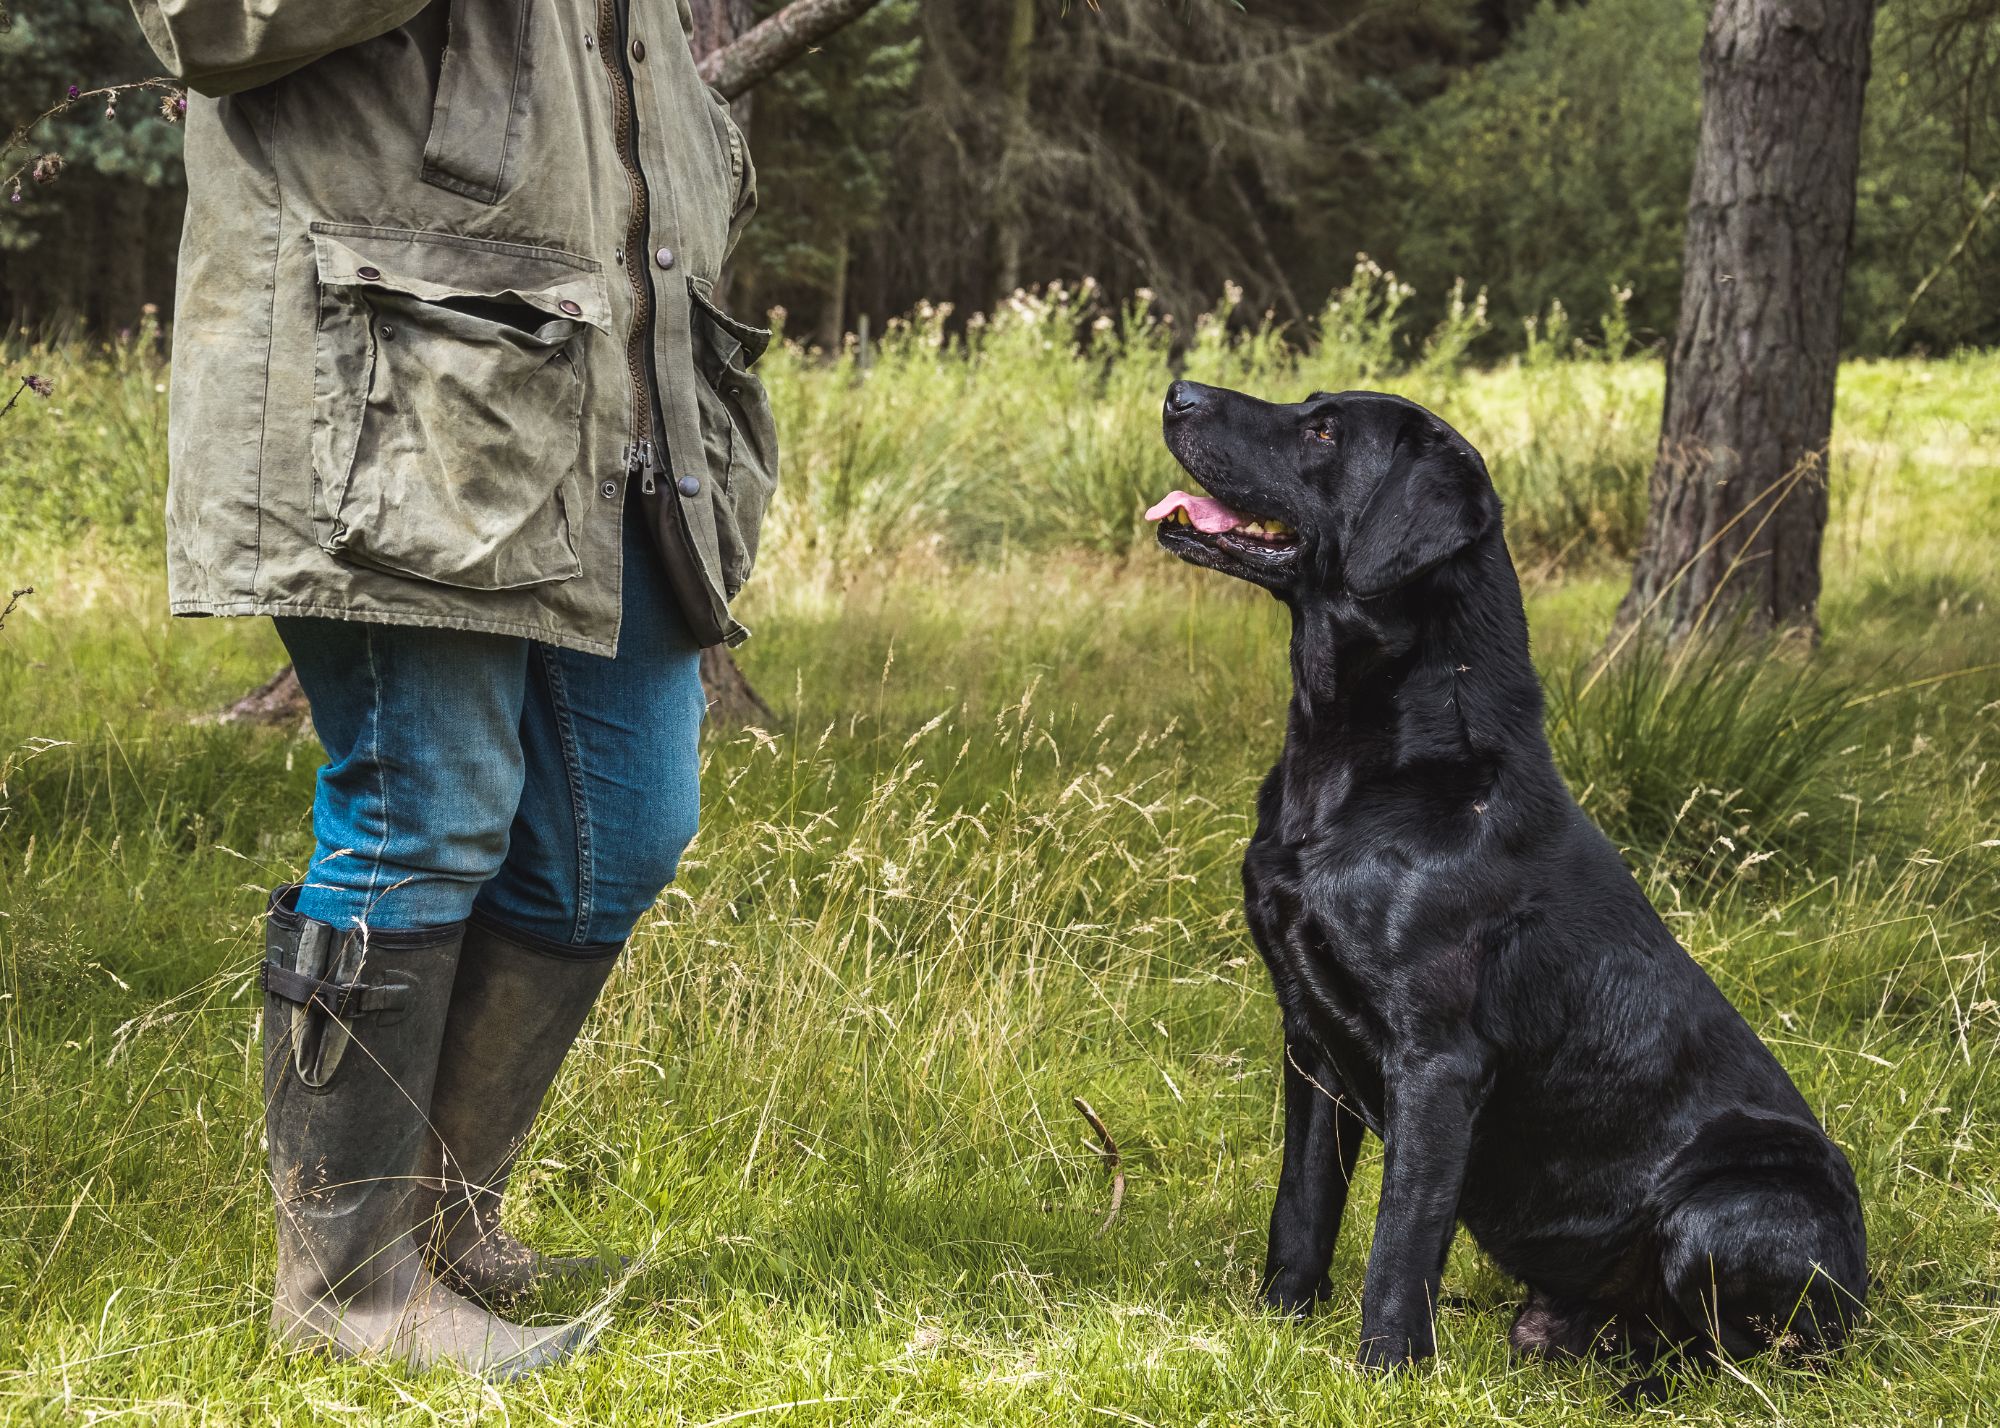 A black lab sits and looks at his owner. They're in a field and all you can see of the owner is her legs, wellies and jacket.